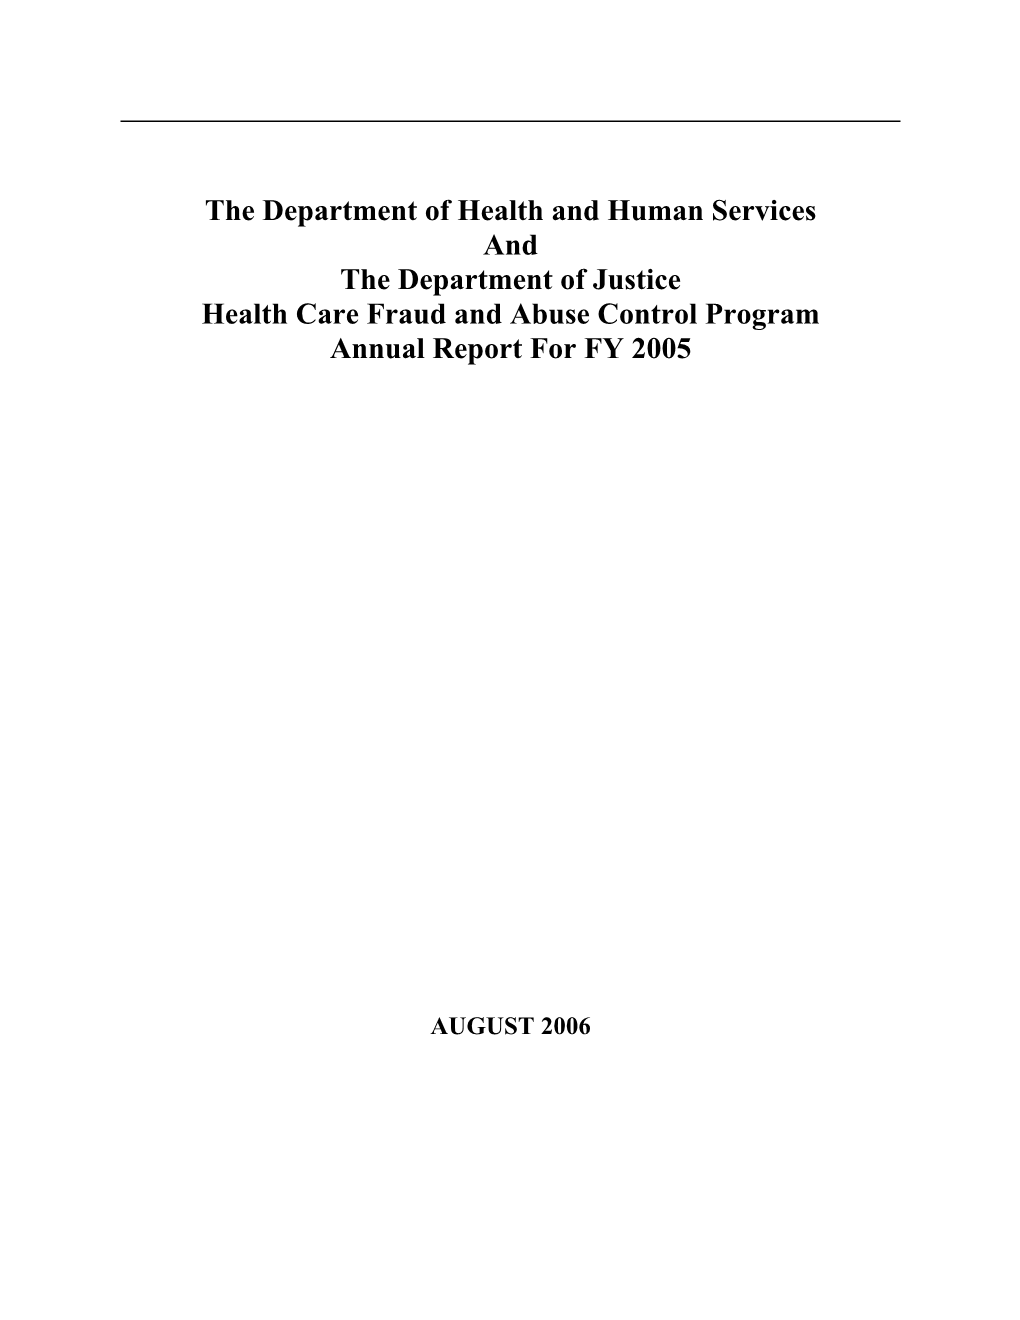 Health Care Fraud and Abuse Control Program Annual Report for FY 2005